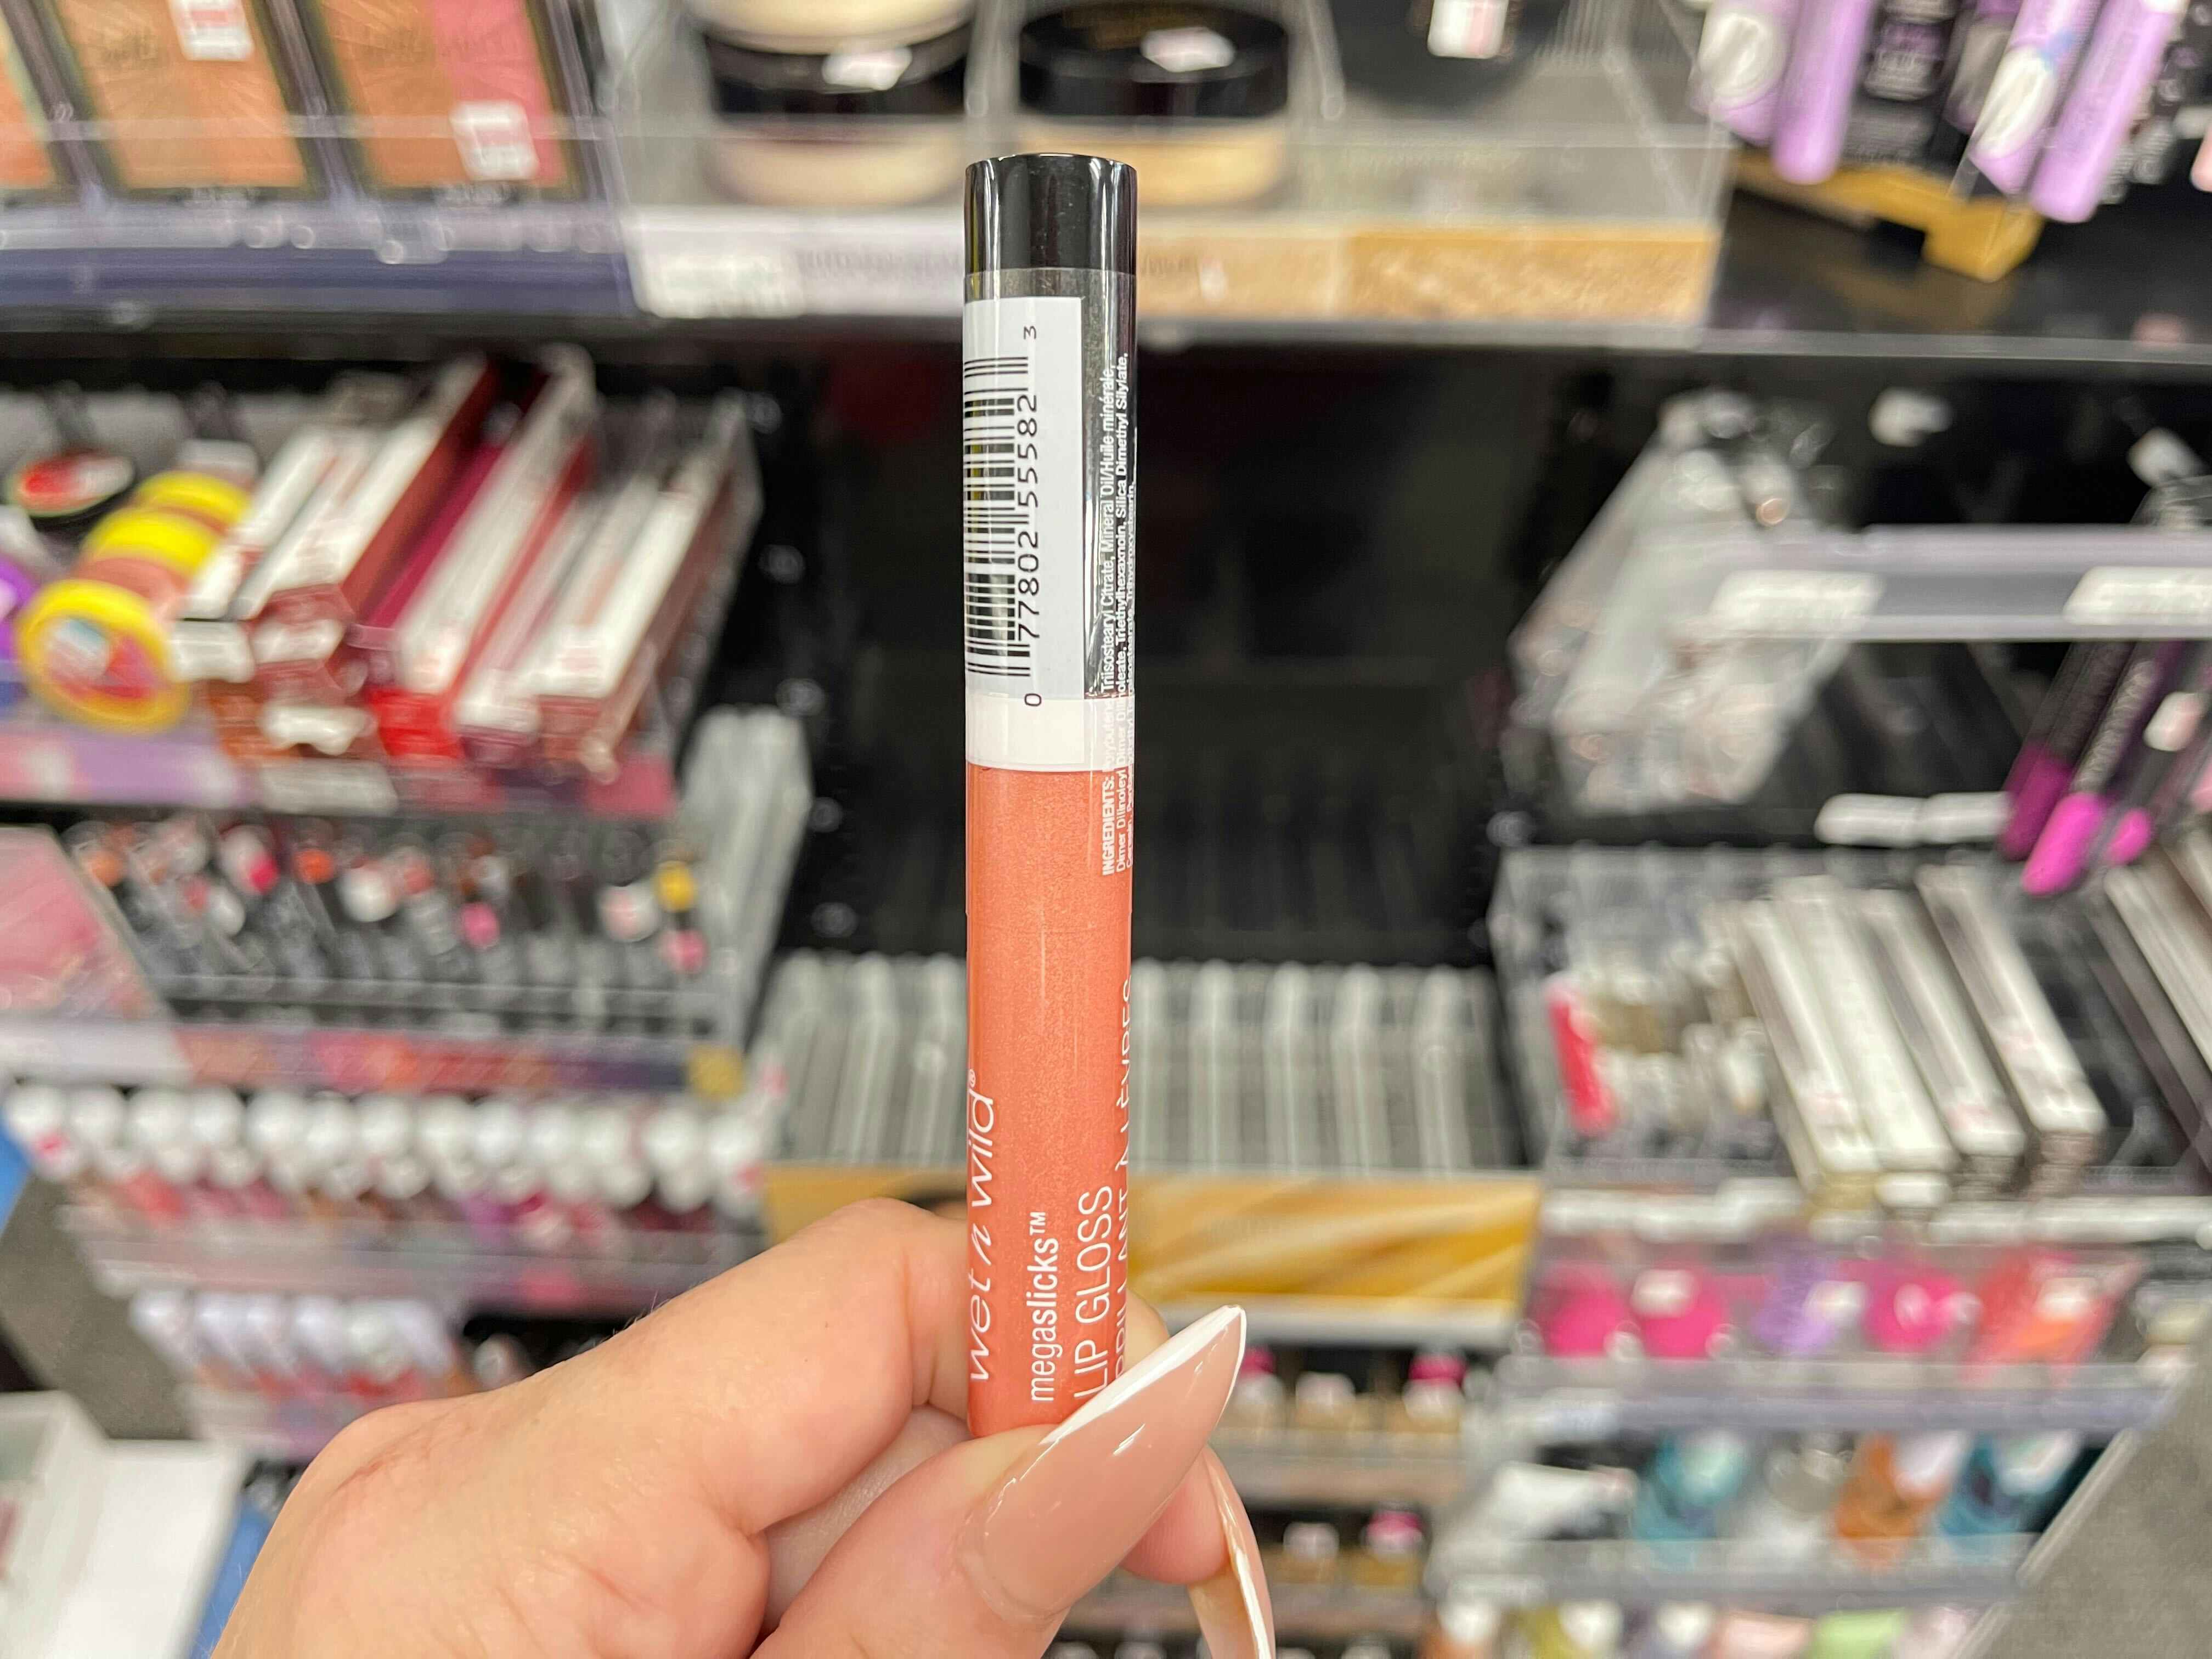 hand holding Wet n Wild megaslicks lip gloss in front of product display